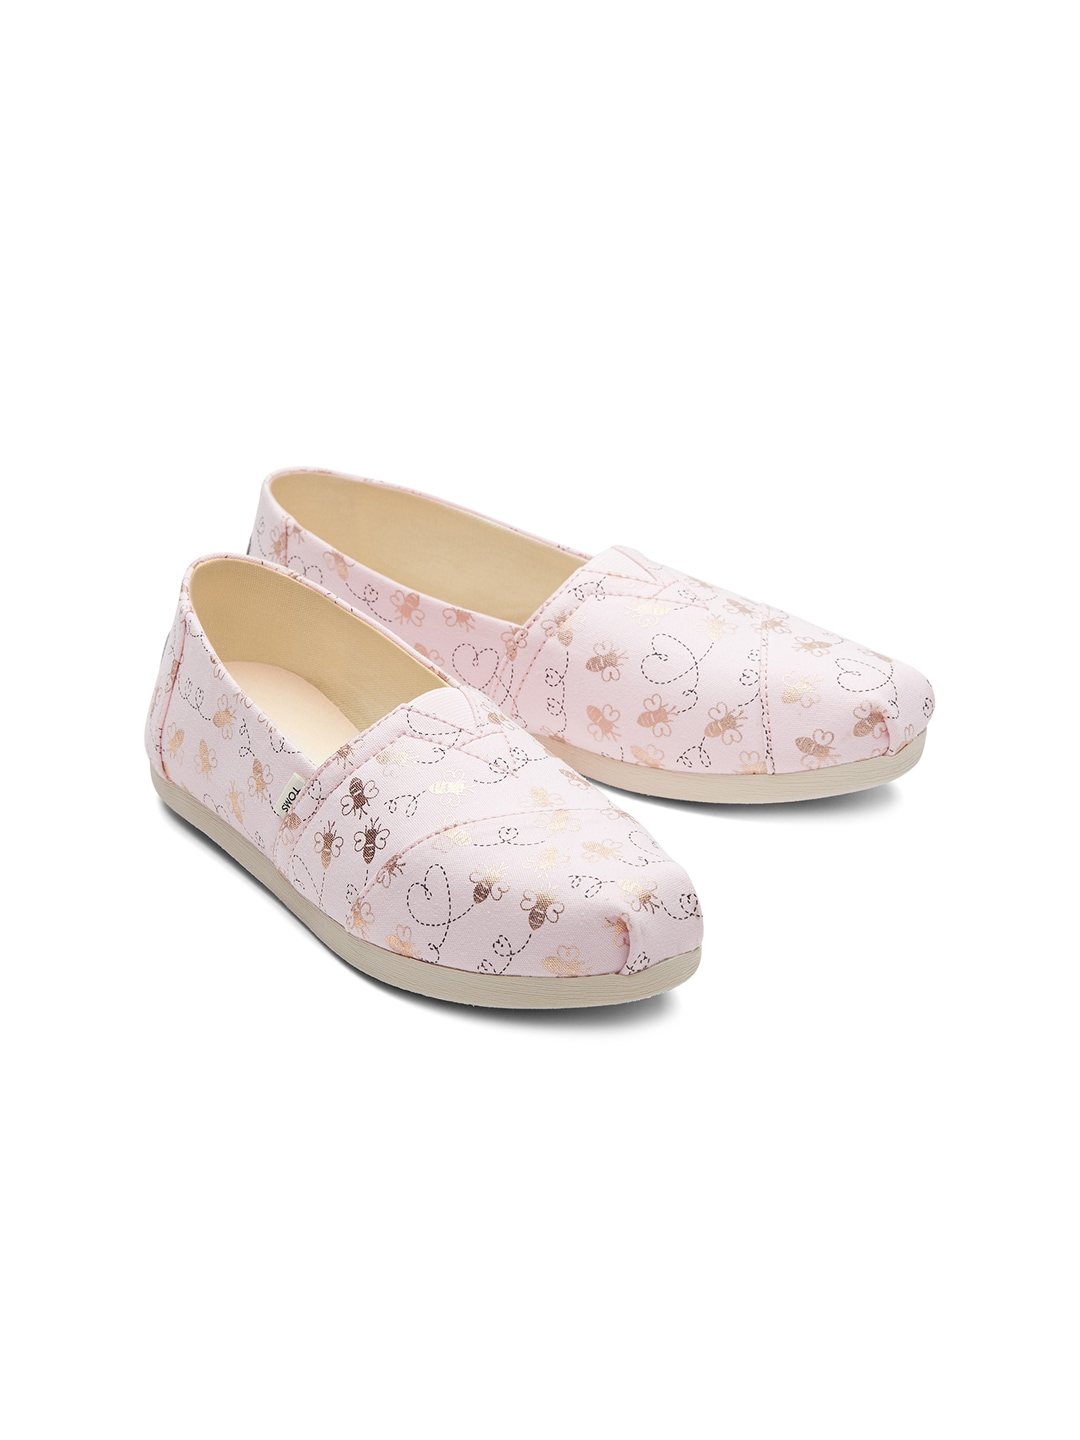 TOMS Women Pink Foil Bee Print Alpargata Slip-on Sneakers Price in India